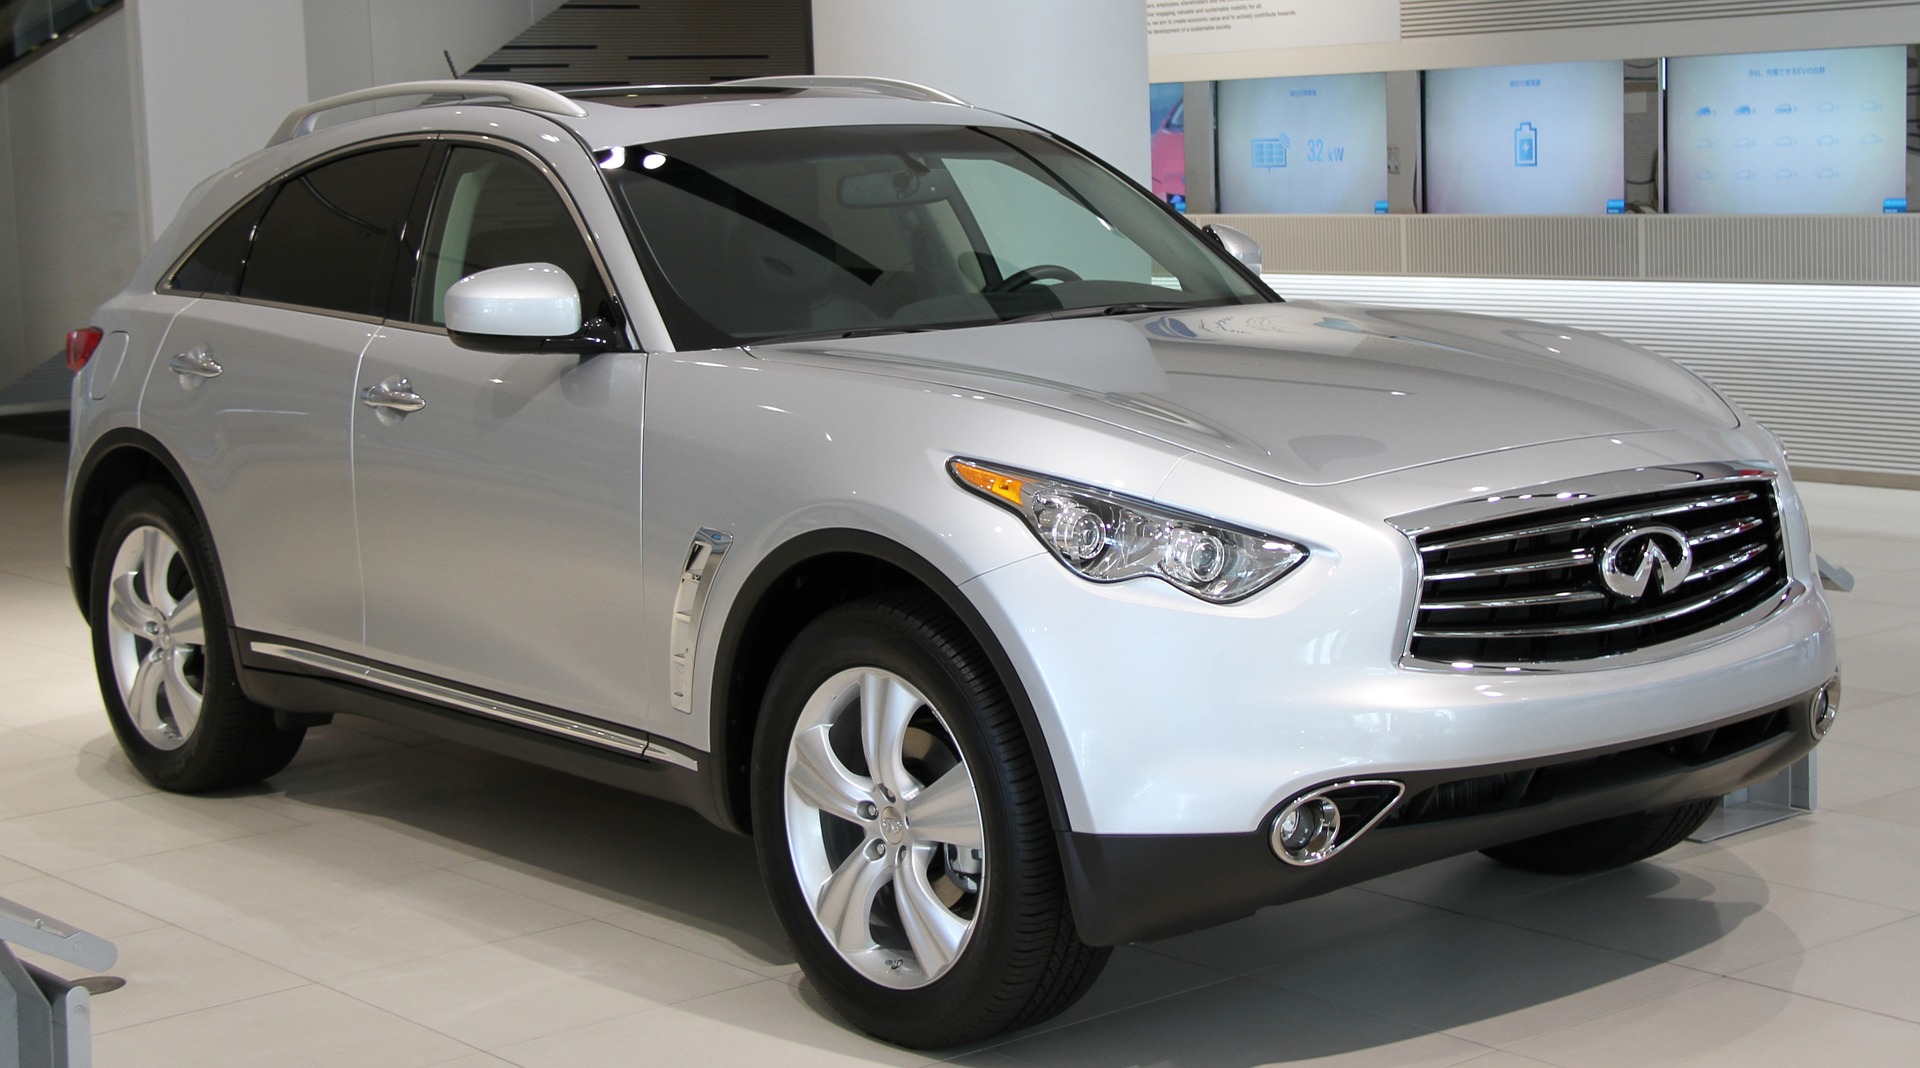 Why You Should Care That INFINITI Doesn’t Approve of Reconditioned Wheels